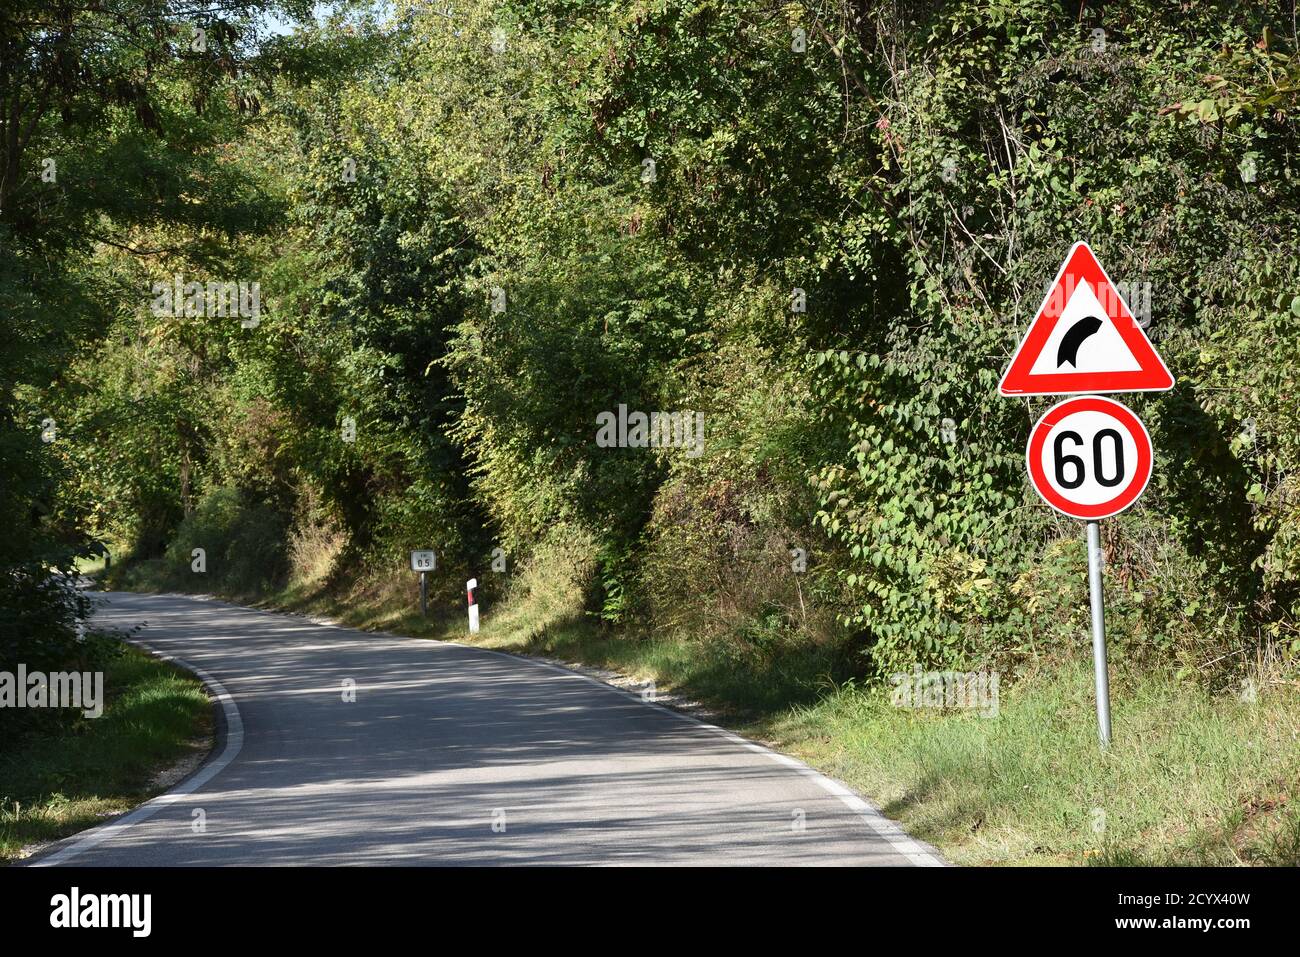 Road signs that shows maximum speed of 60 kilometers per hour and signa that warns drivers on sharp curve on the road ahead Stock Photo